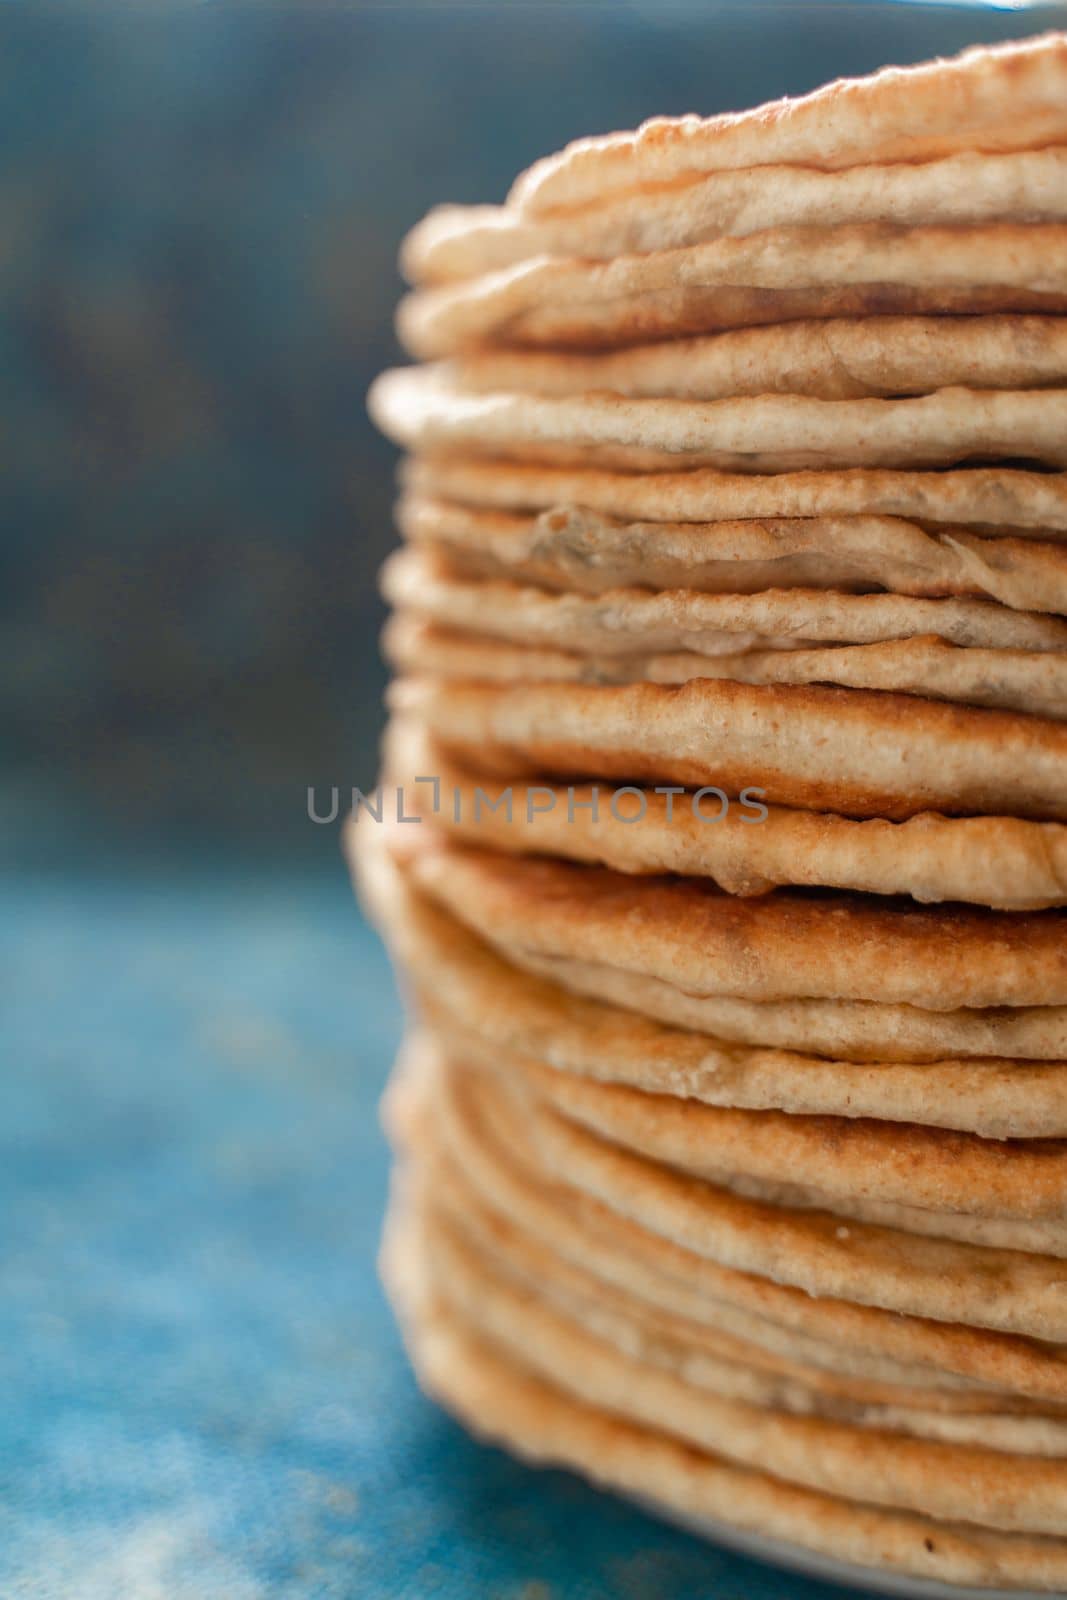 Flatbread lavash, chapati, naan, heap of tortilla on a blue background Homemade flatbread stacked